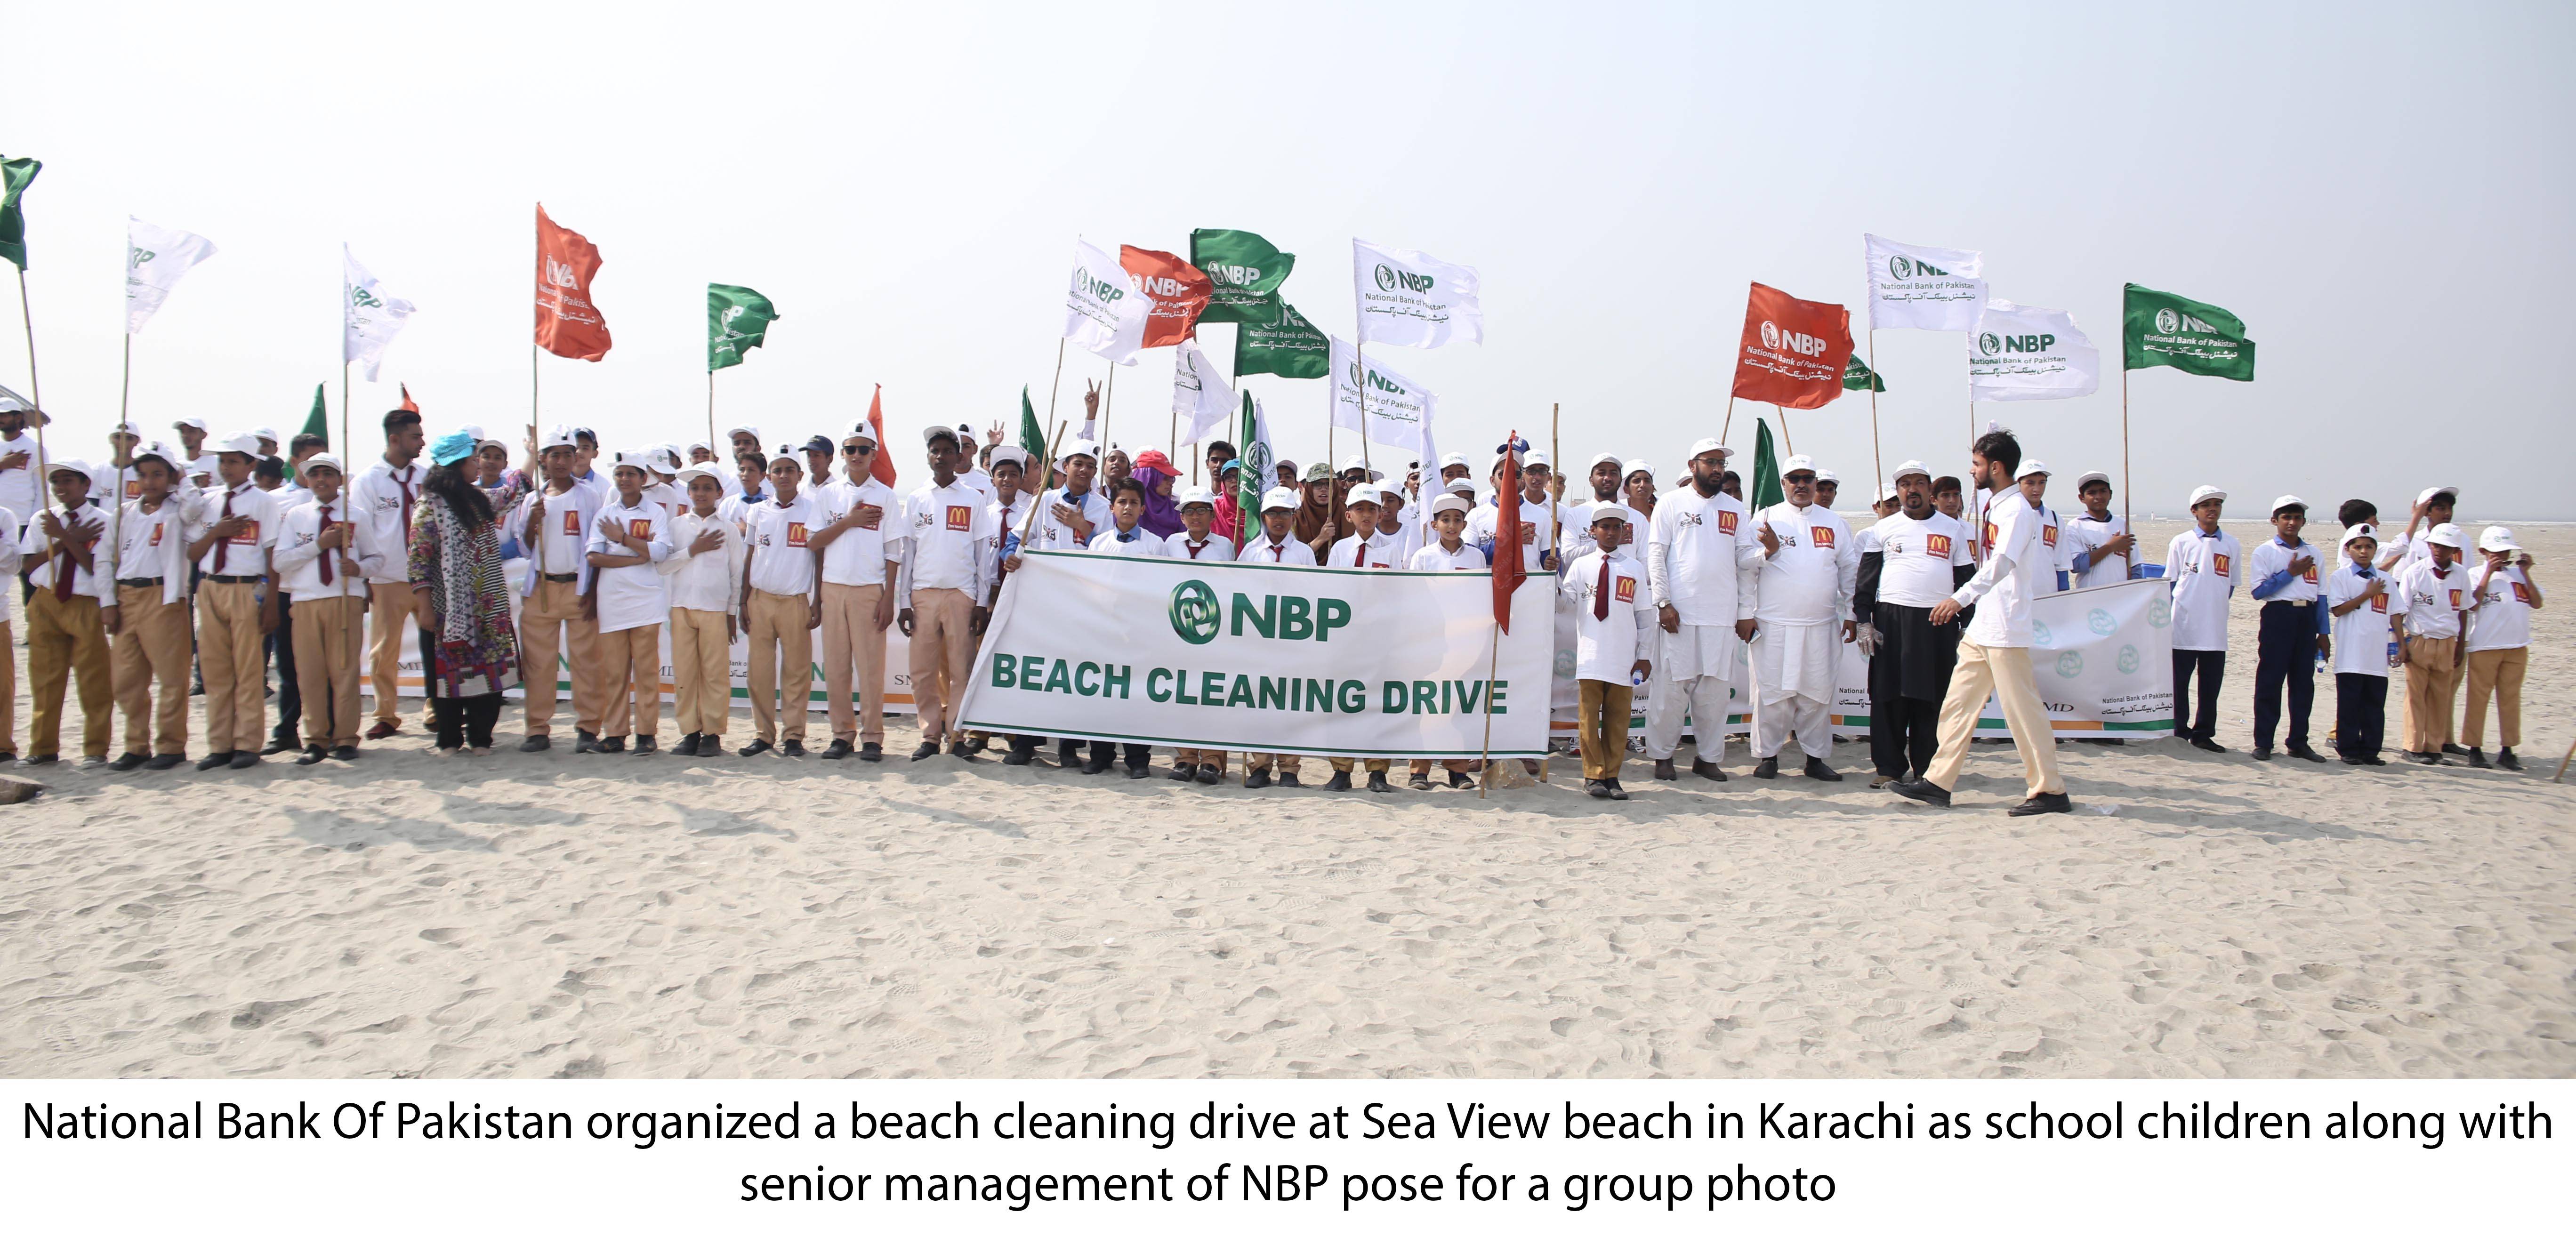 NATIONAL BANK OF PAKISTAN ORGANIZES BEACH CLEANING DRIVE